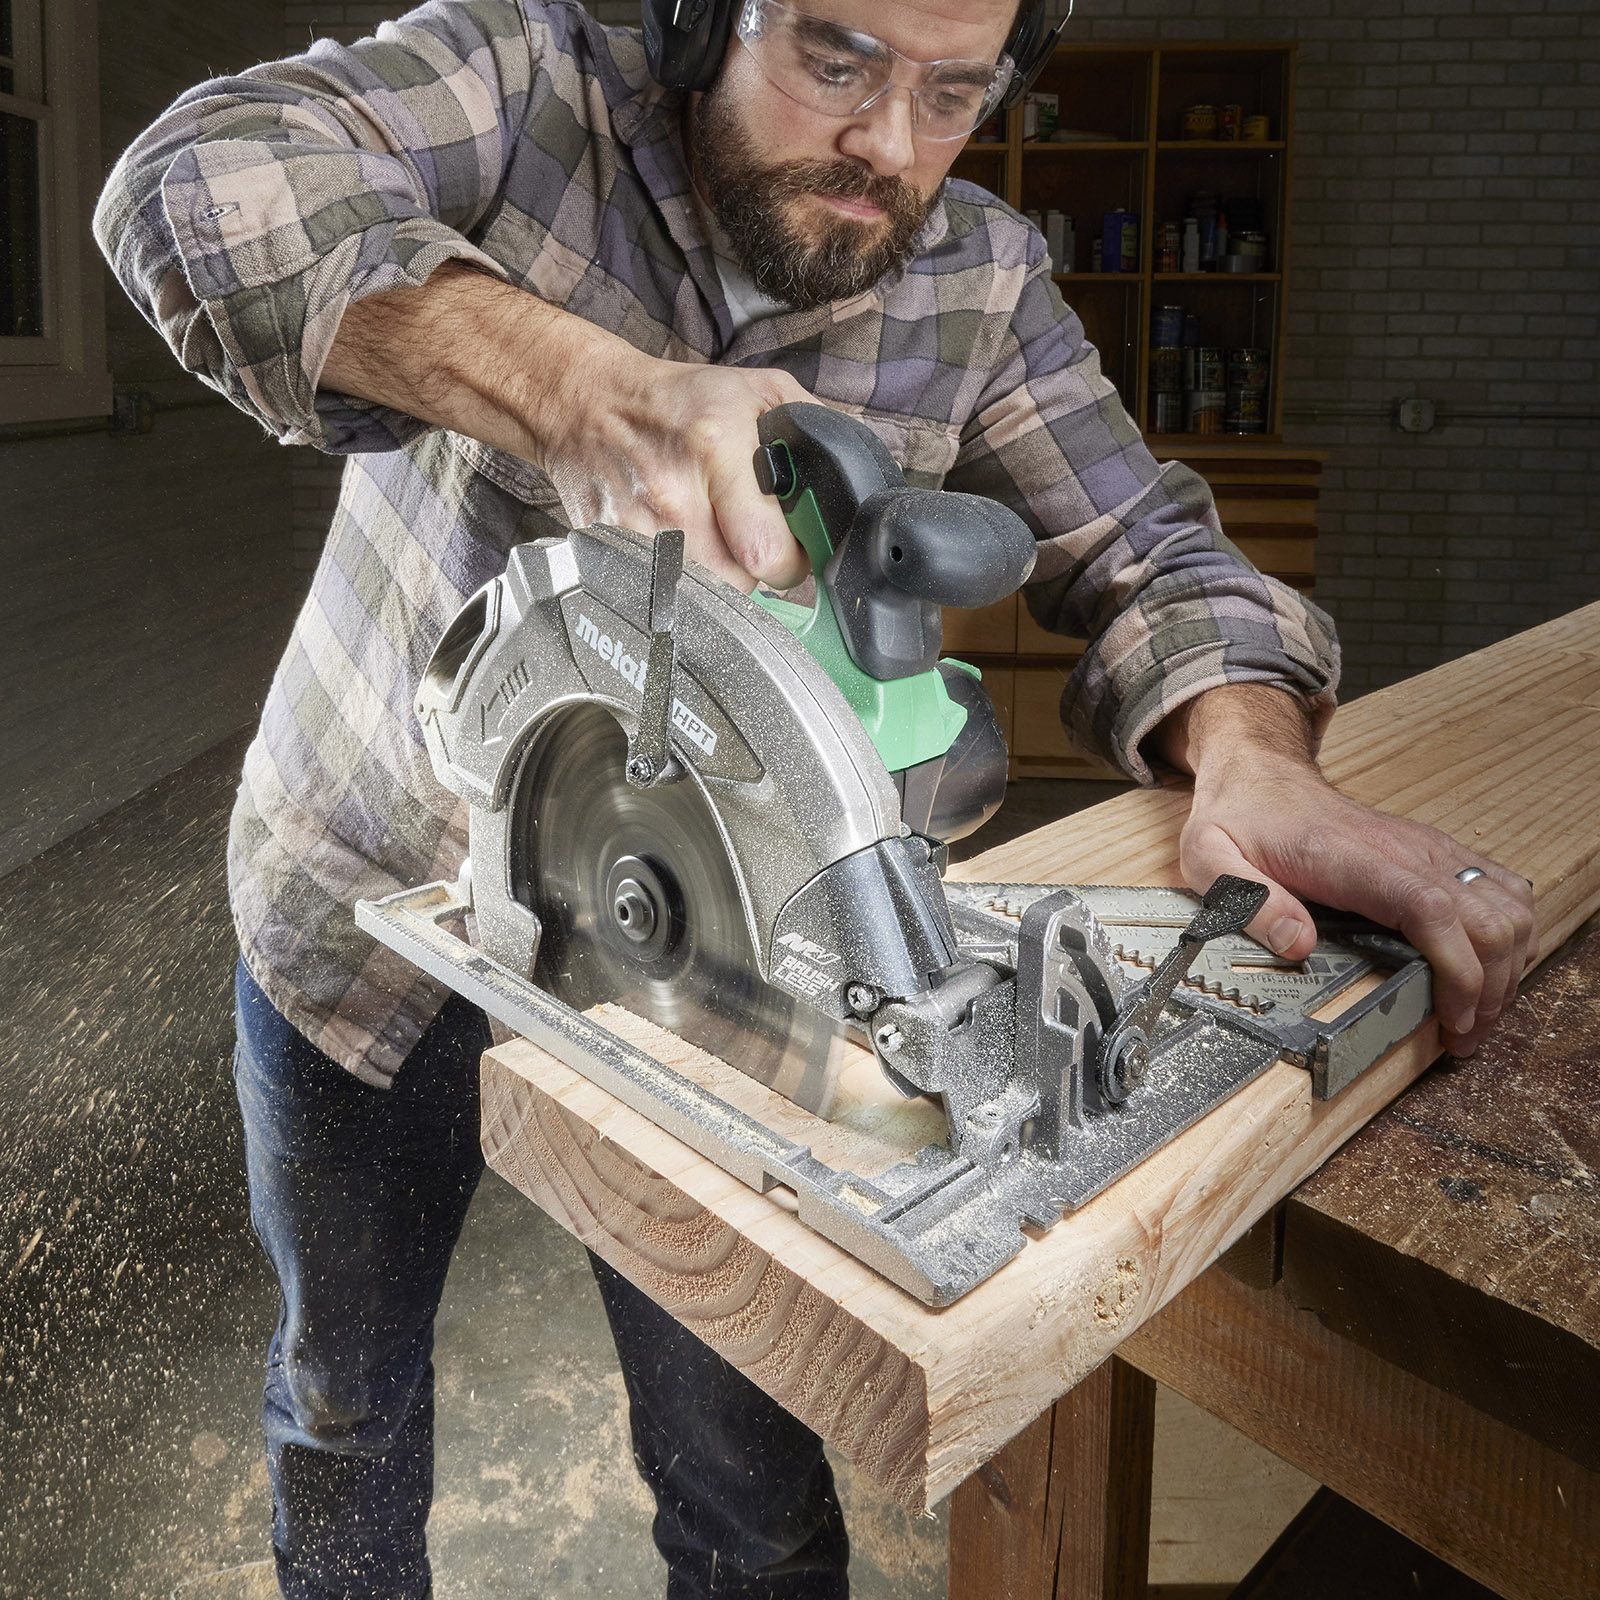 How To Use a Circular Saw: A Complete Guide